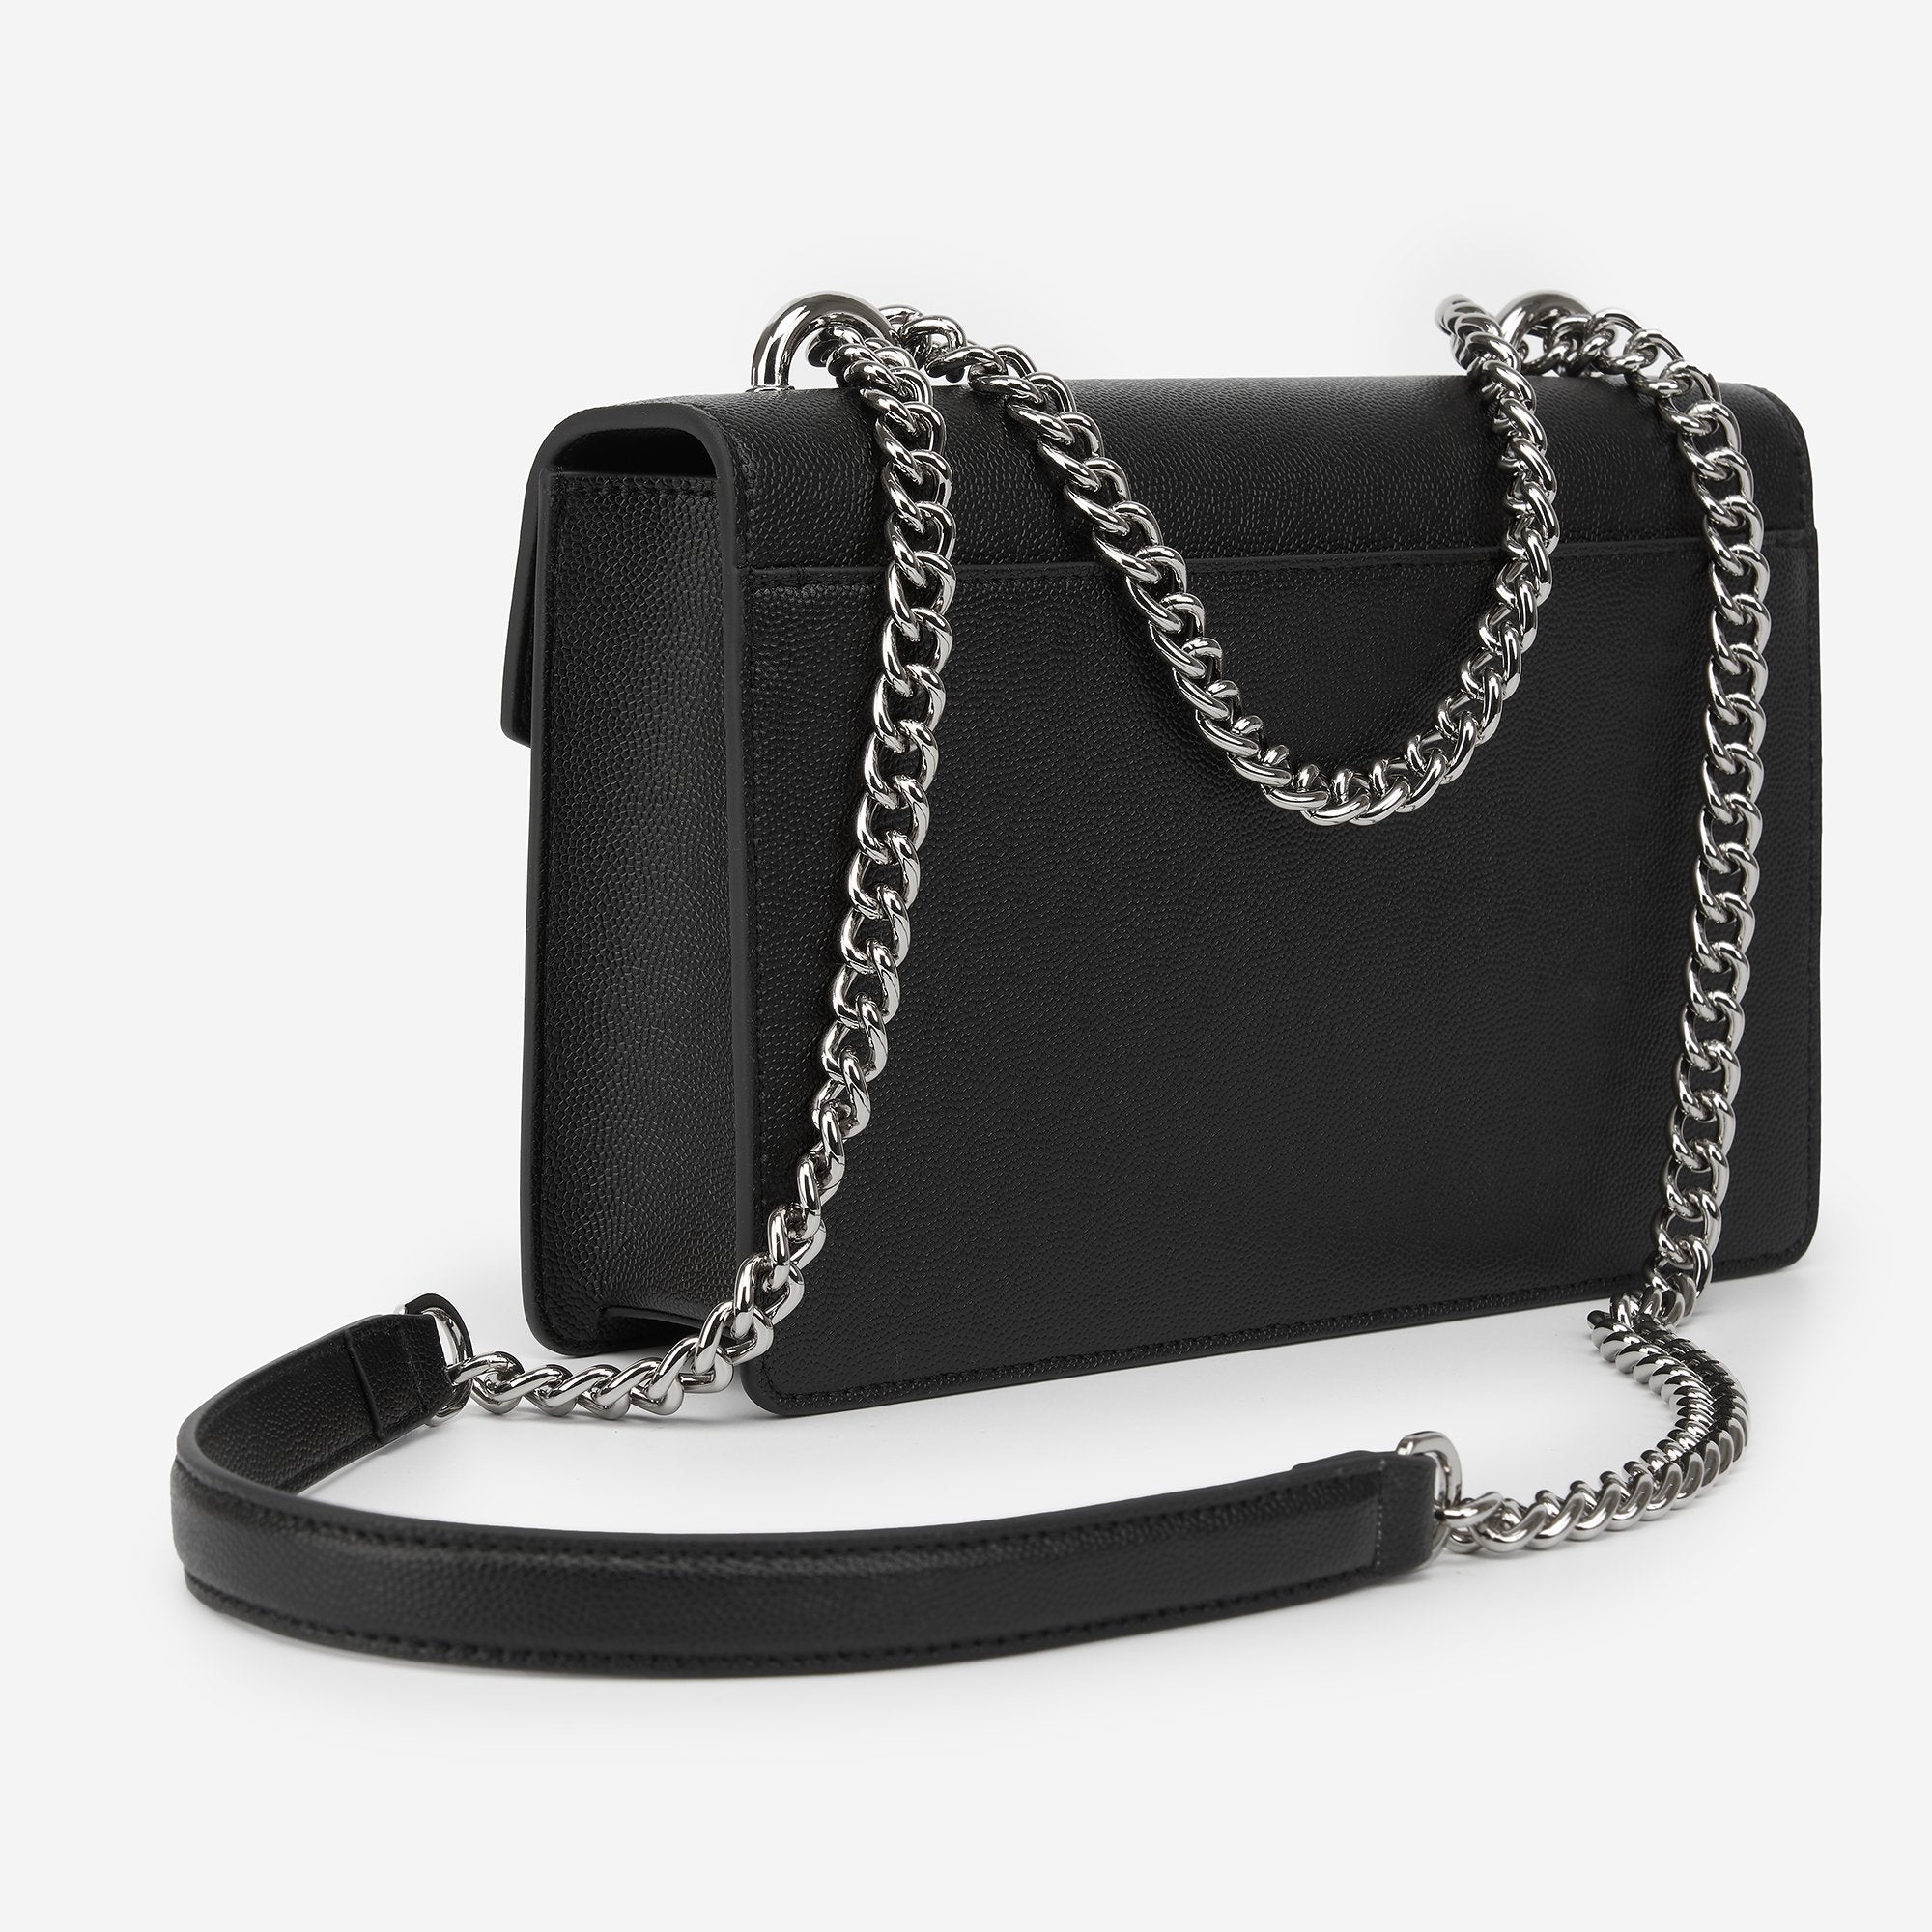 JW PEI - The Envelope Chain Crossbody Photo by @raychpearson